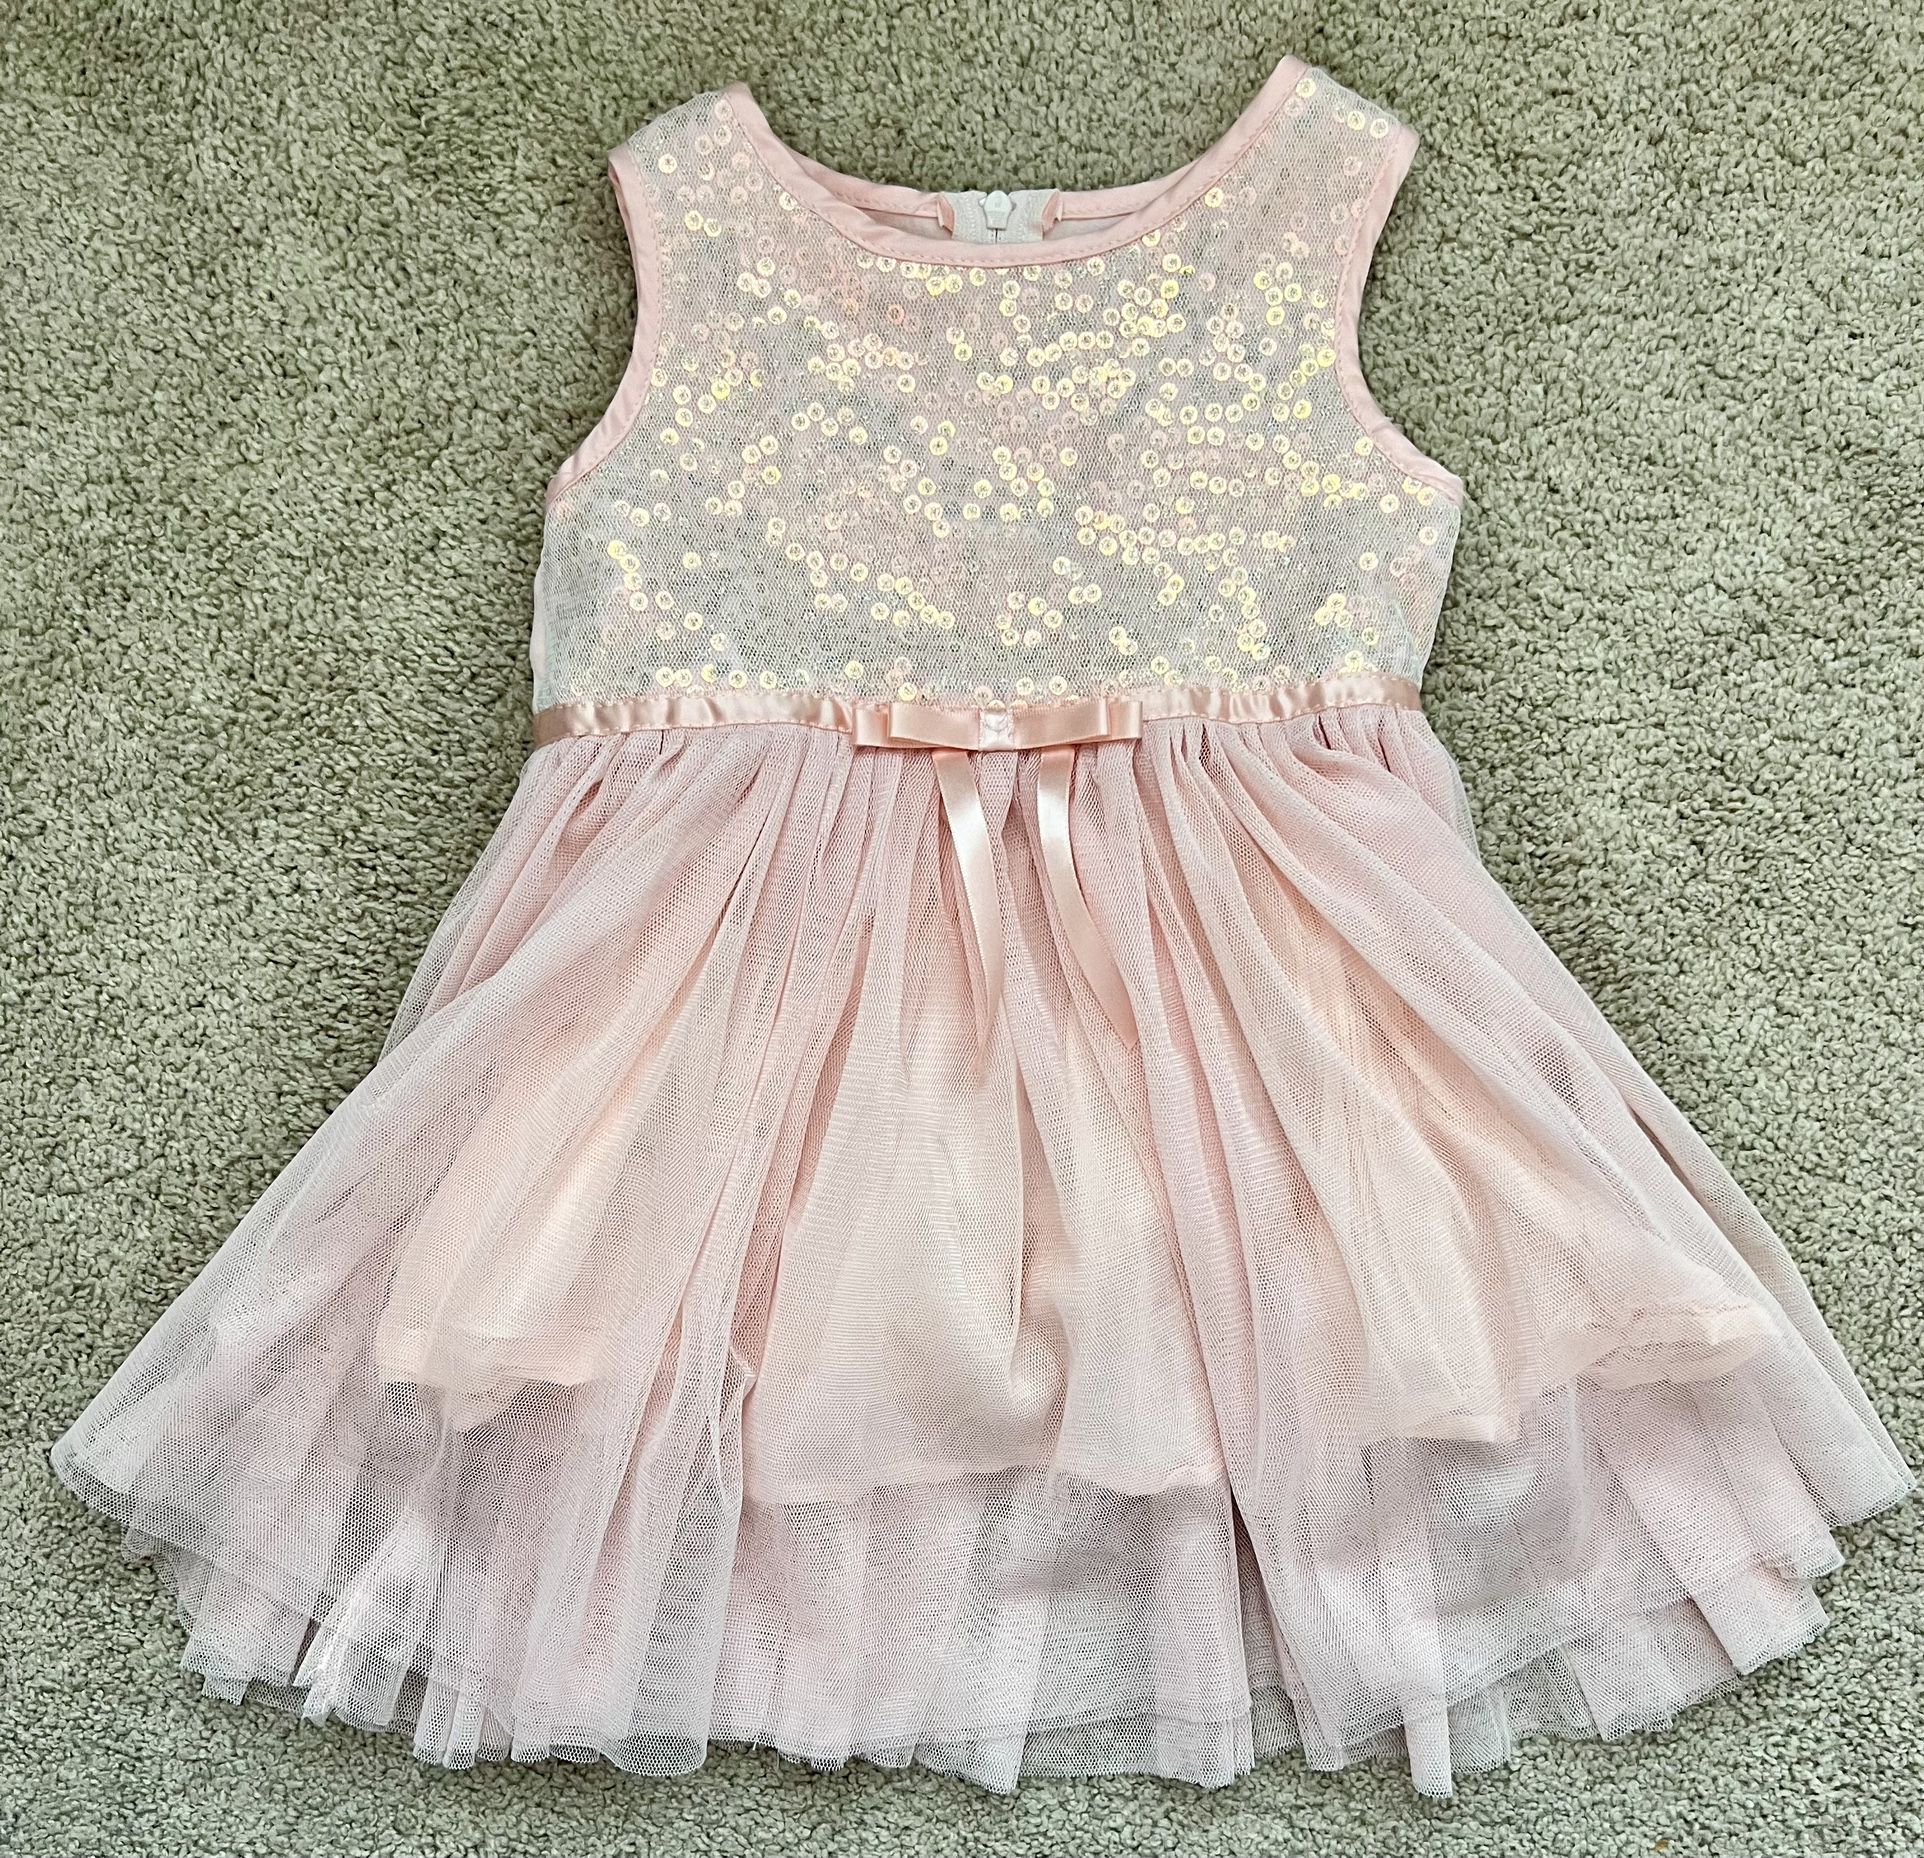 Popatu Toddler Girl Sequin & Tulle Dress, size 18 months